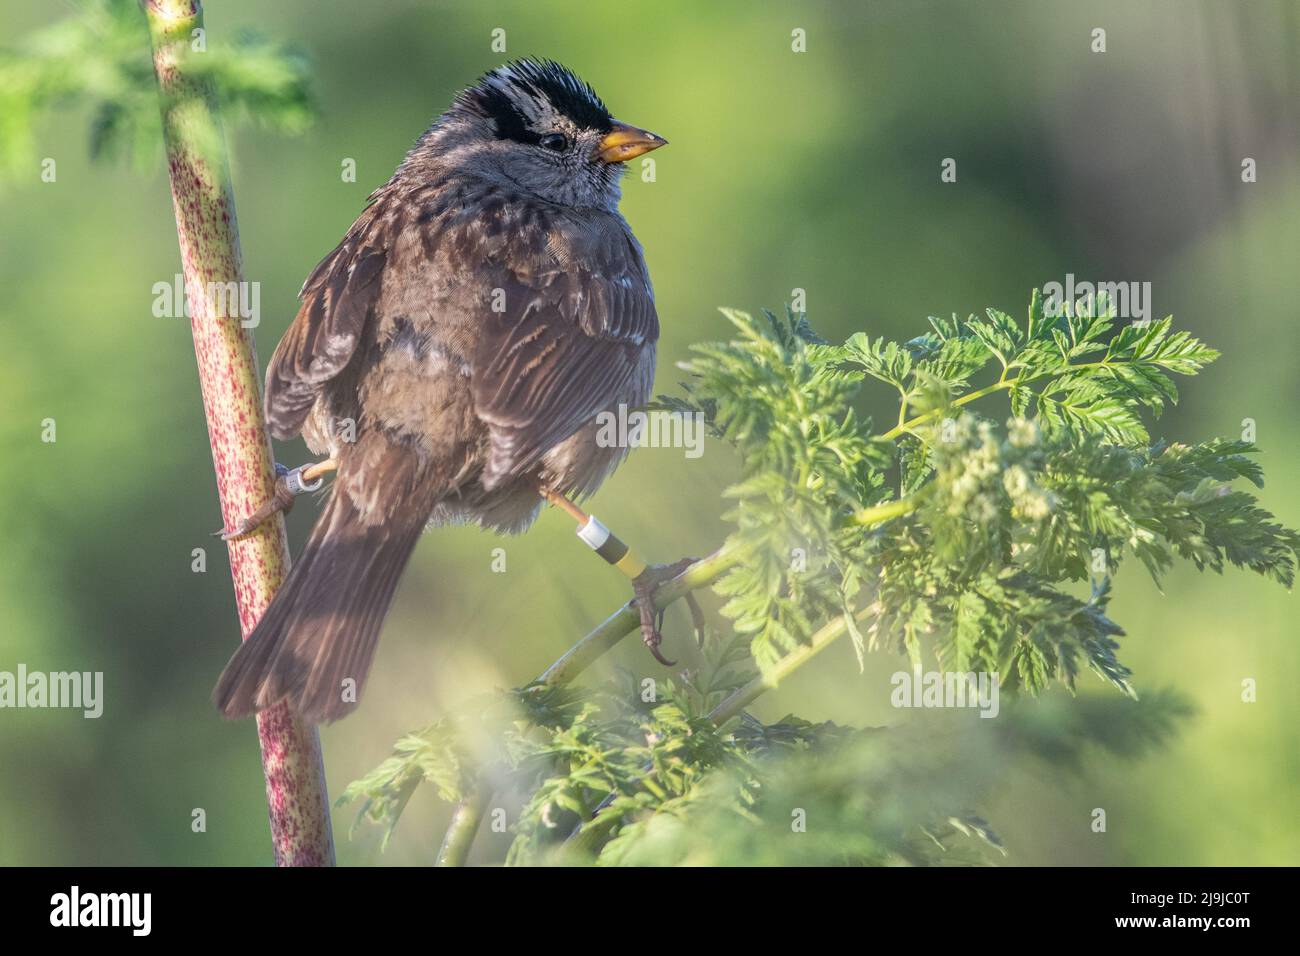 A white-crowned sparrow (Zonotrichia leucophrys) with bird bands on its legs, it is part of a scientific study in Point Reyes National Seashore, CA. Stock Photo